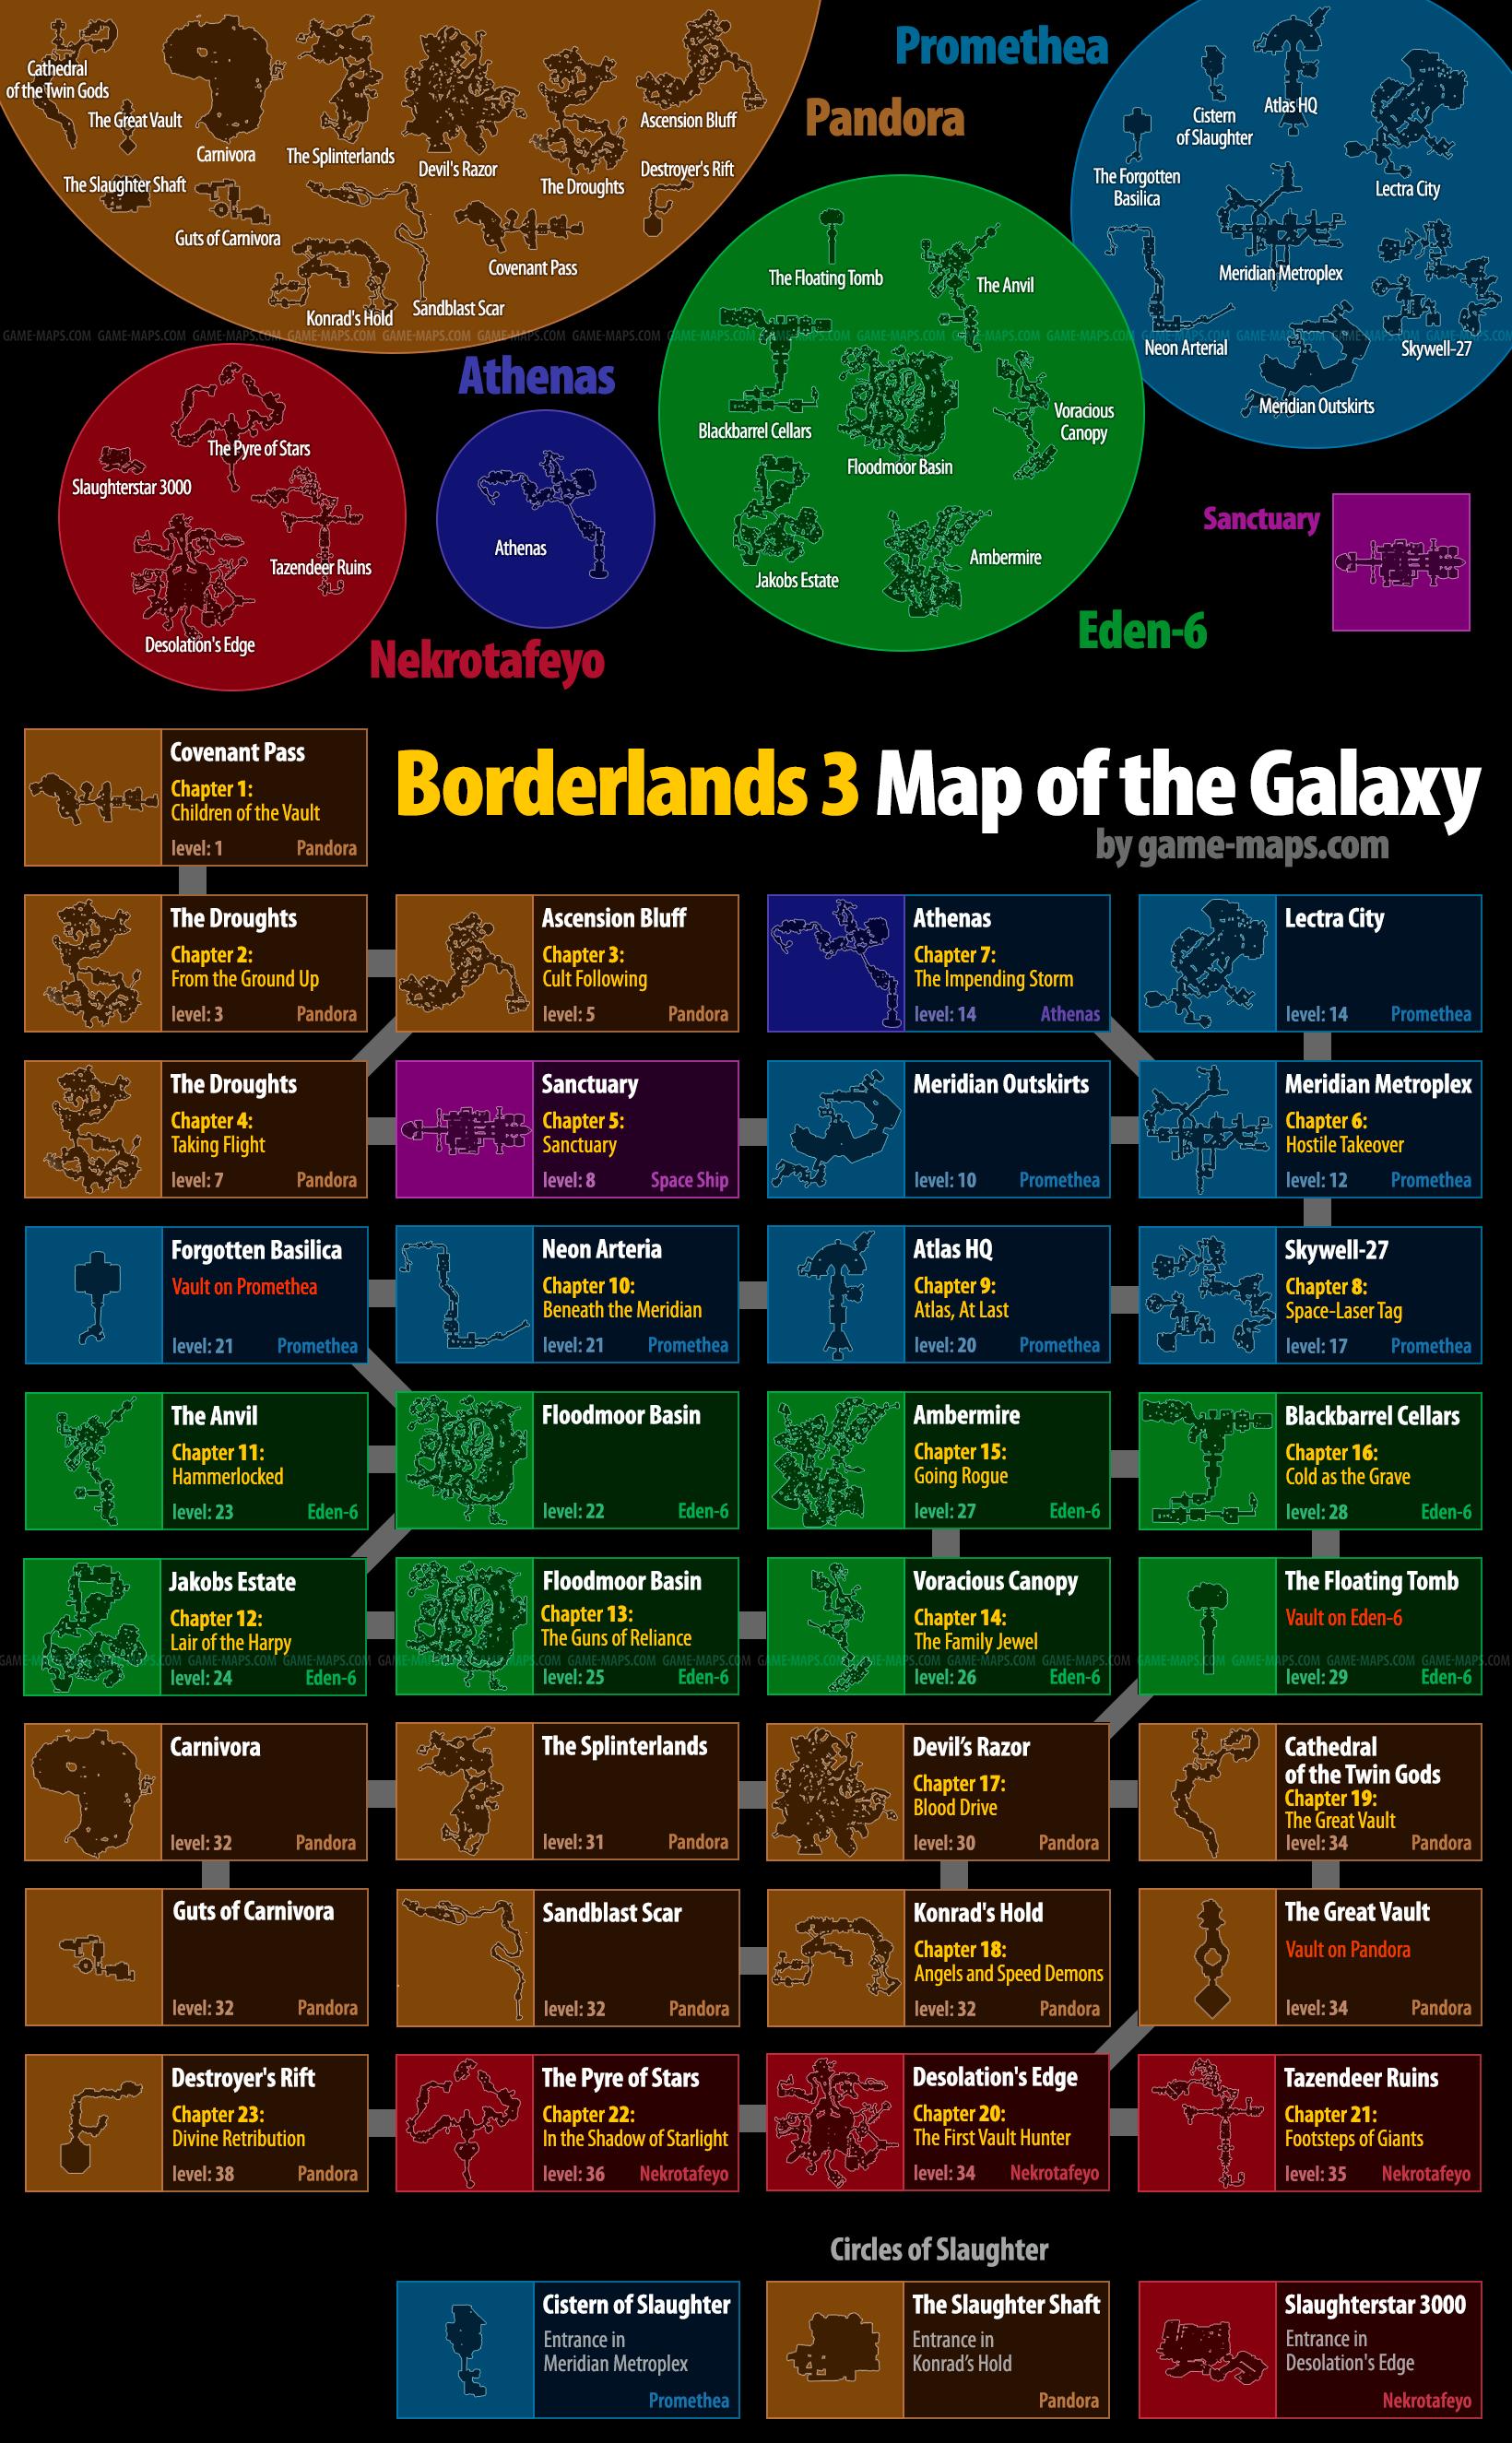 Borderlands 3 Map of the Galaxy